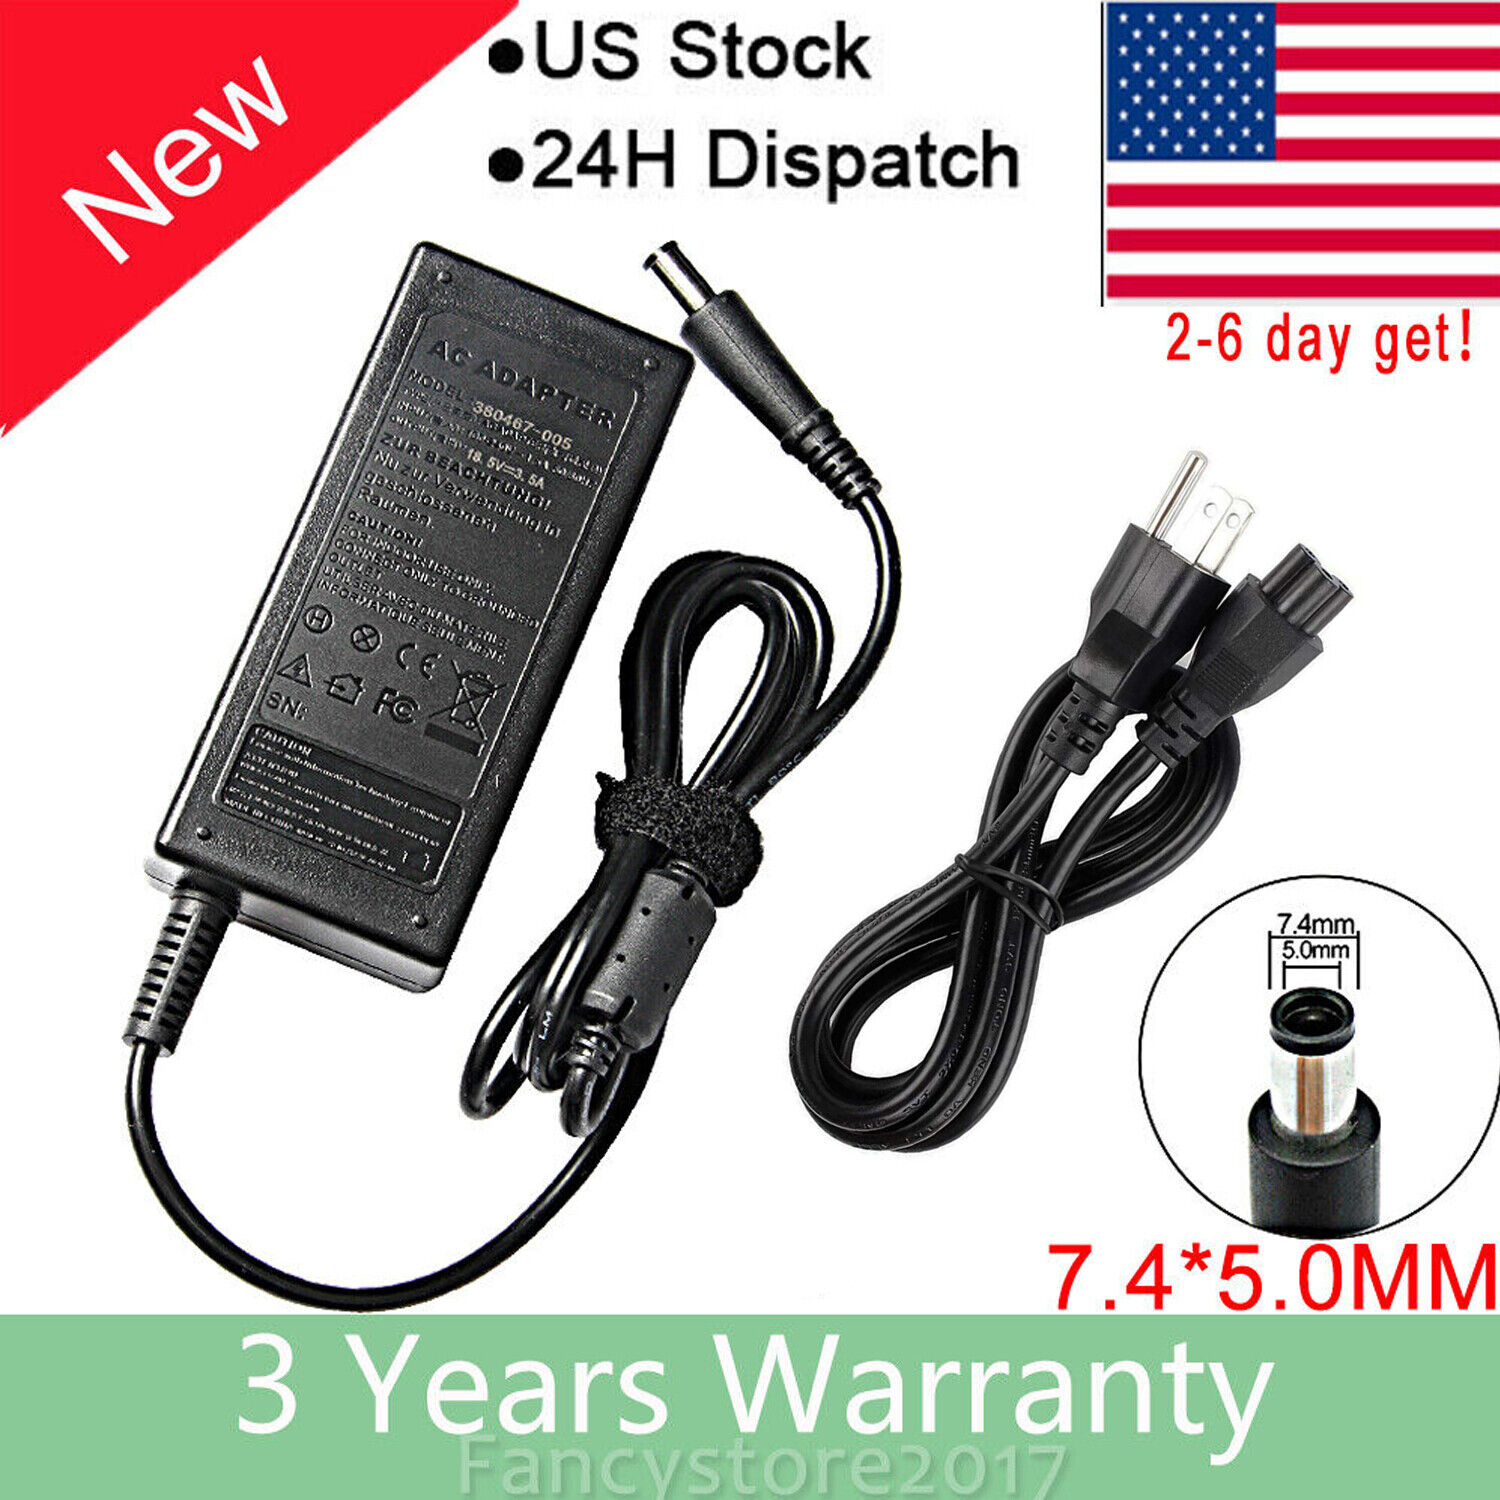 AC Adapter For HP 2000-219DX 2000-224CA Notebook PC Charger Power Supply Cord FS